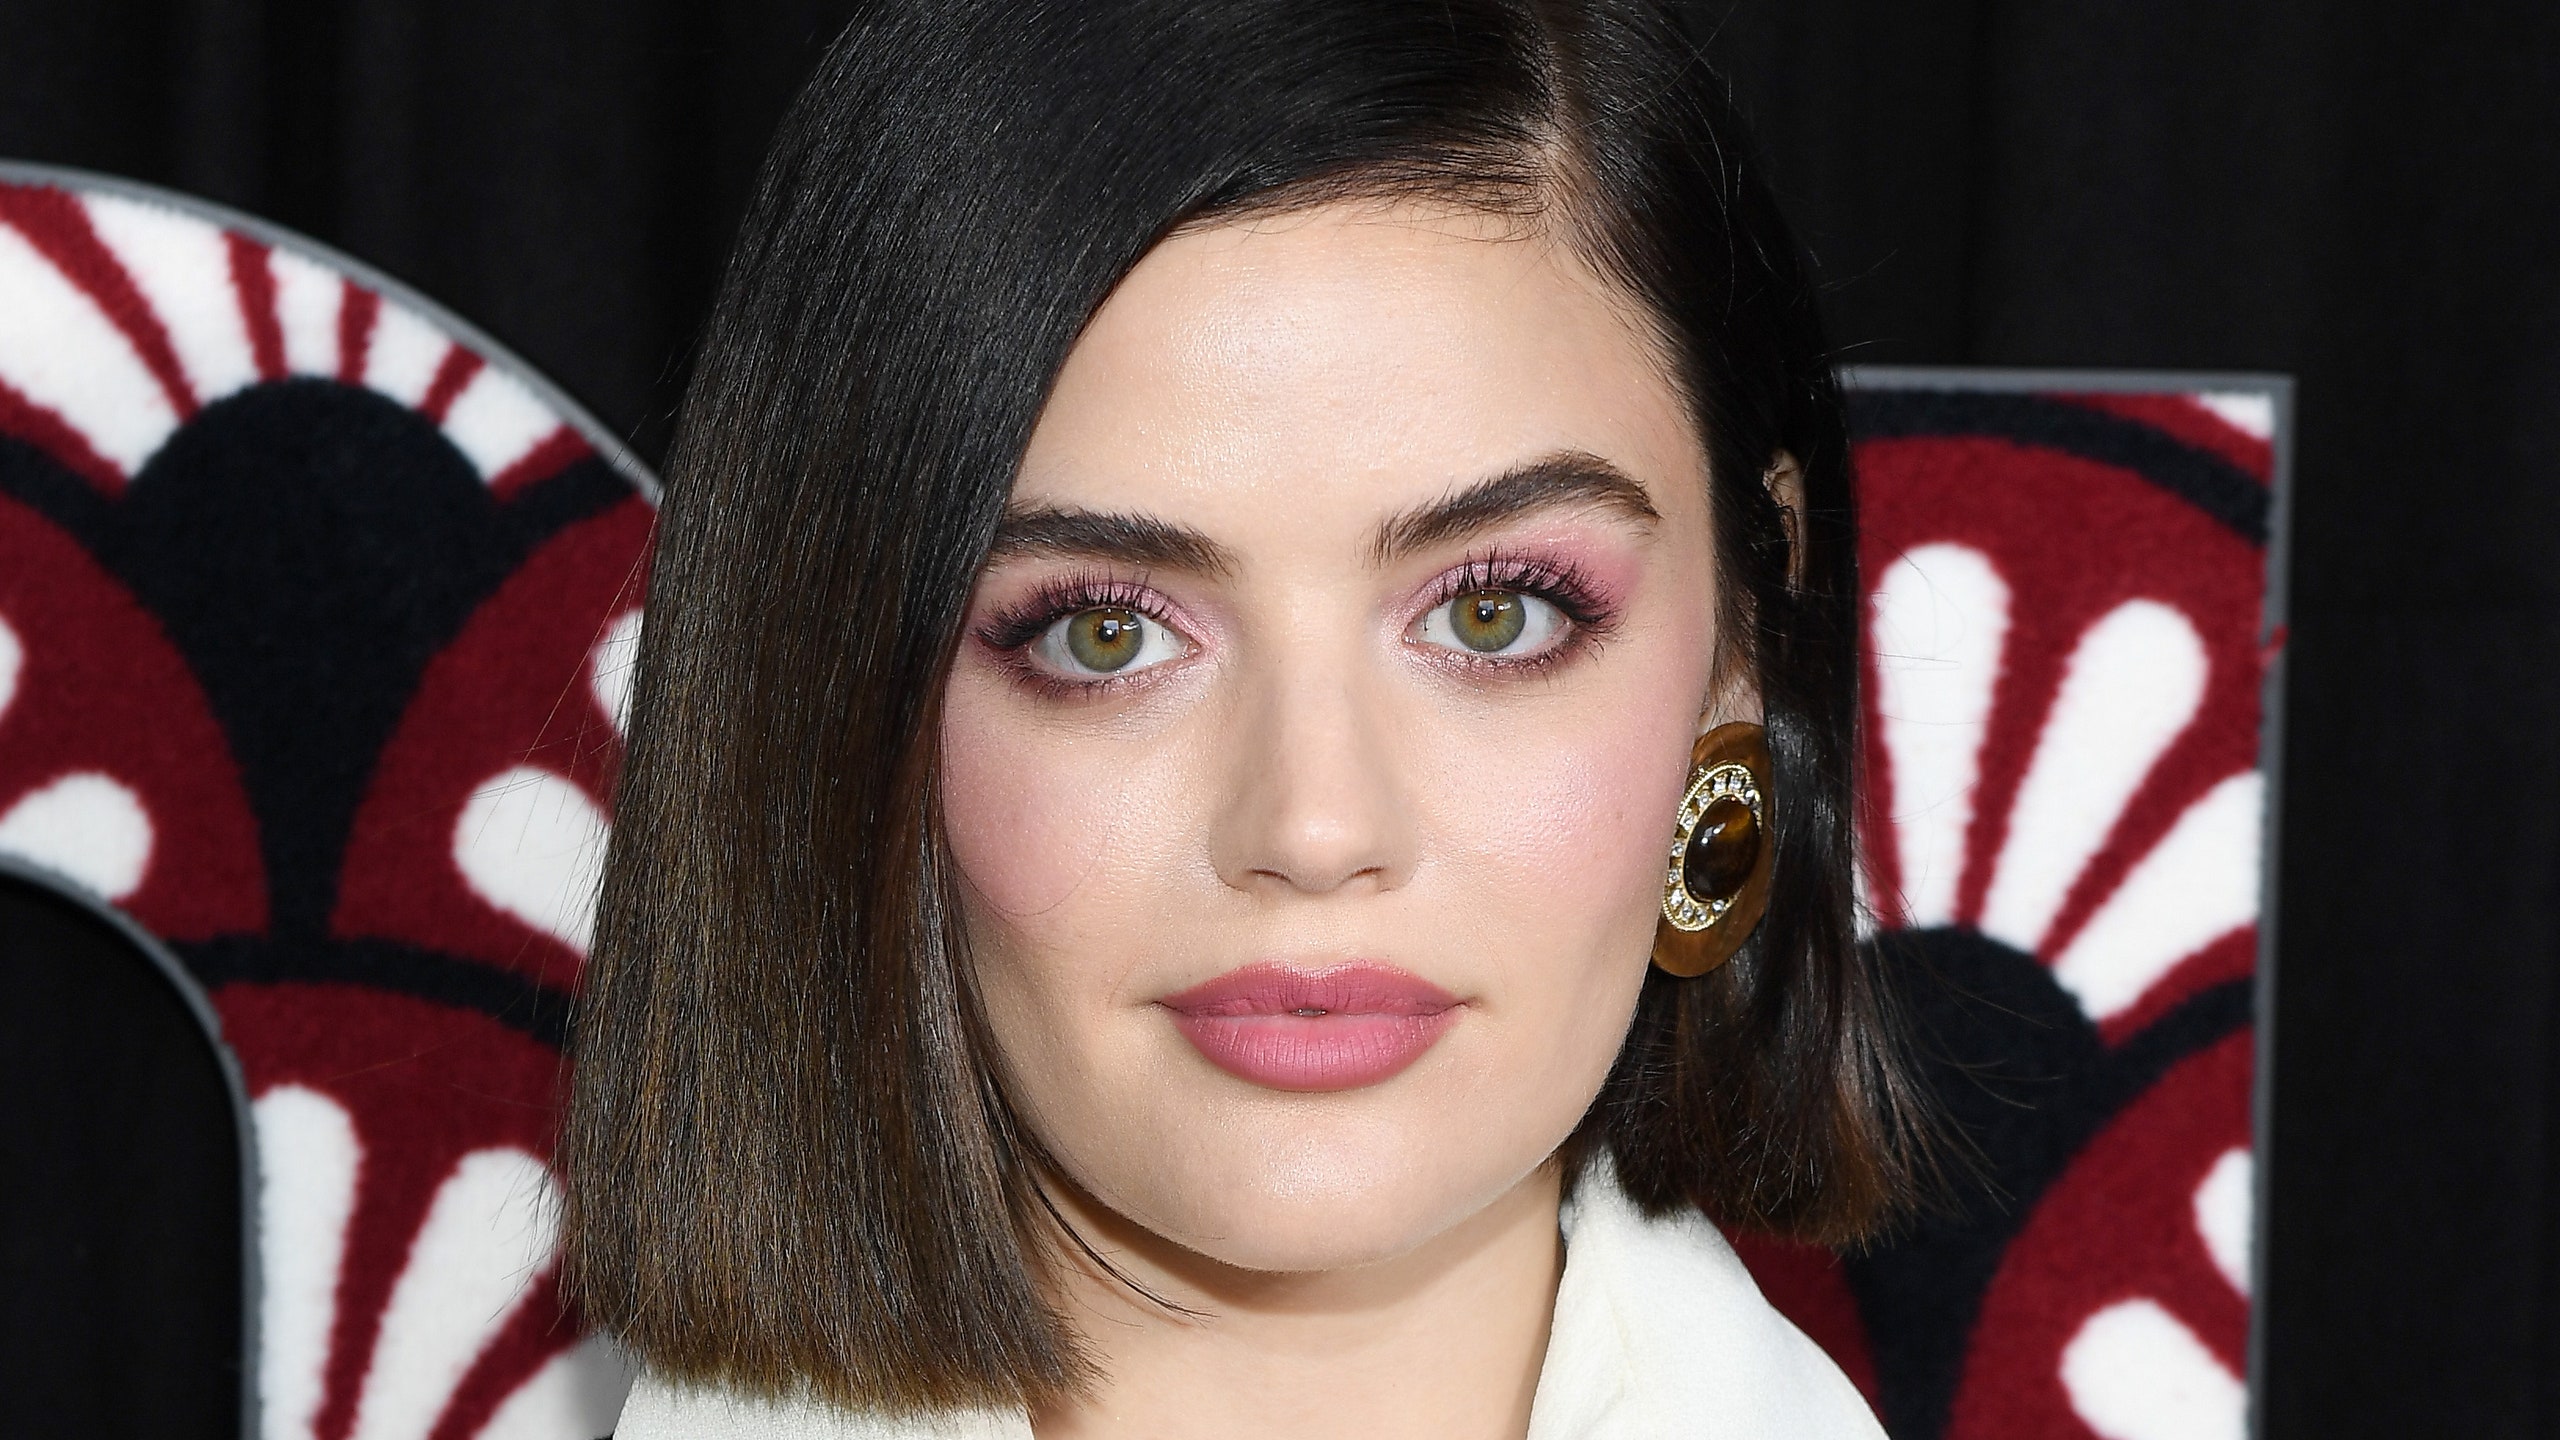 Lucy Hale 2018 Wallpapers